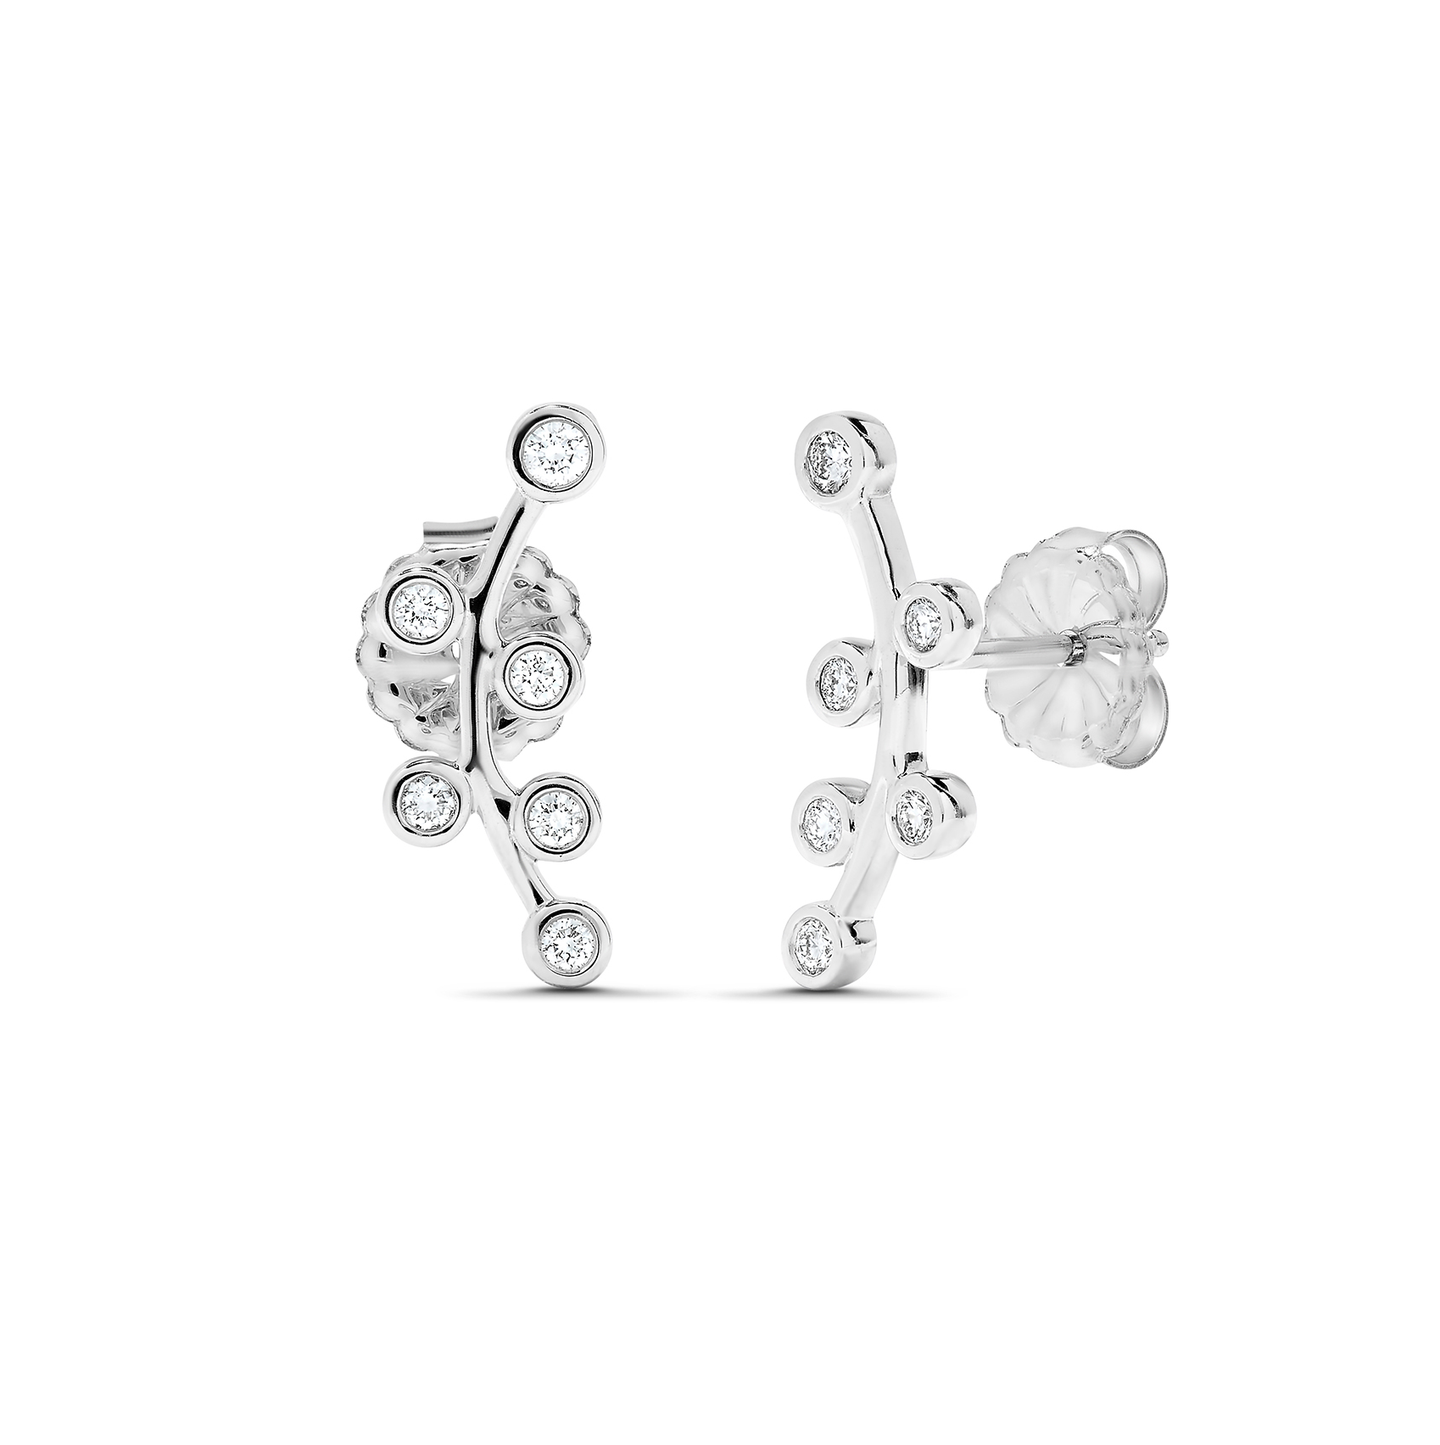 Sabel Collection 18K White Gold Floral Diamond Climber Earrings in .26cttw